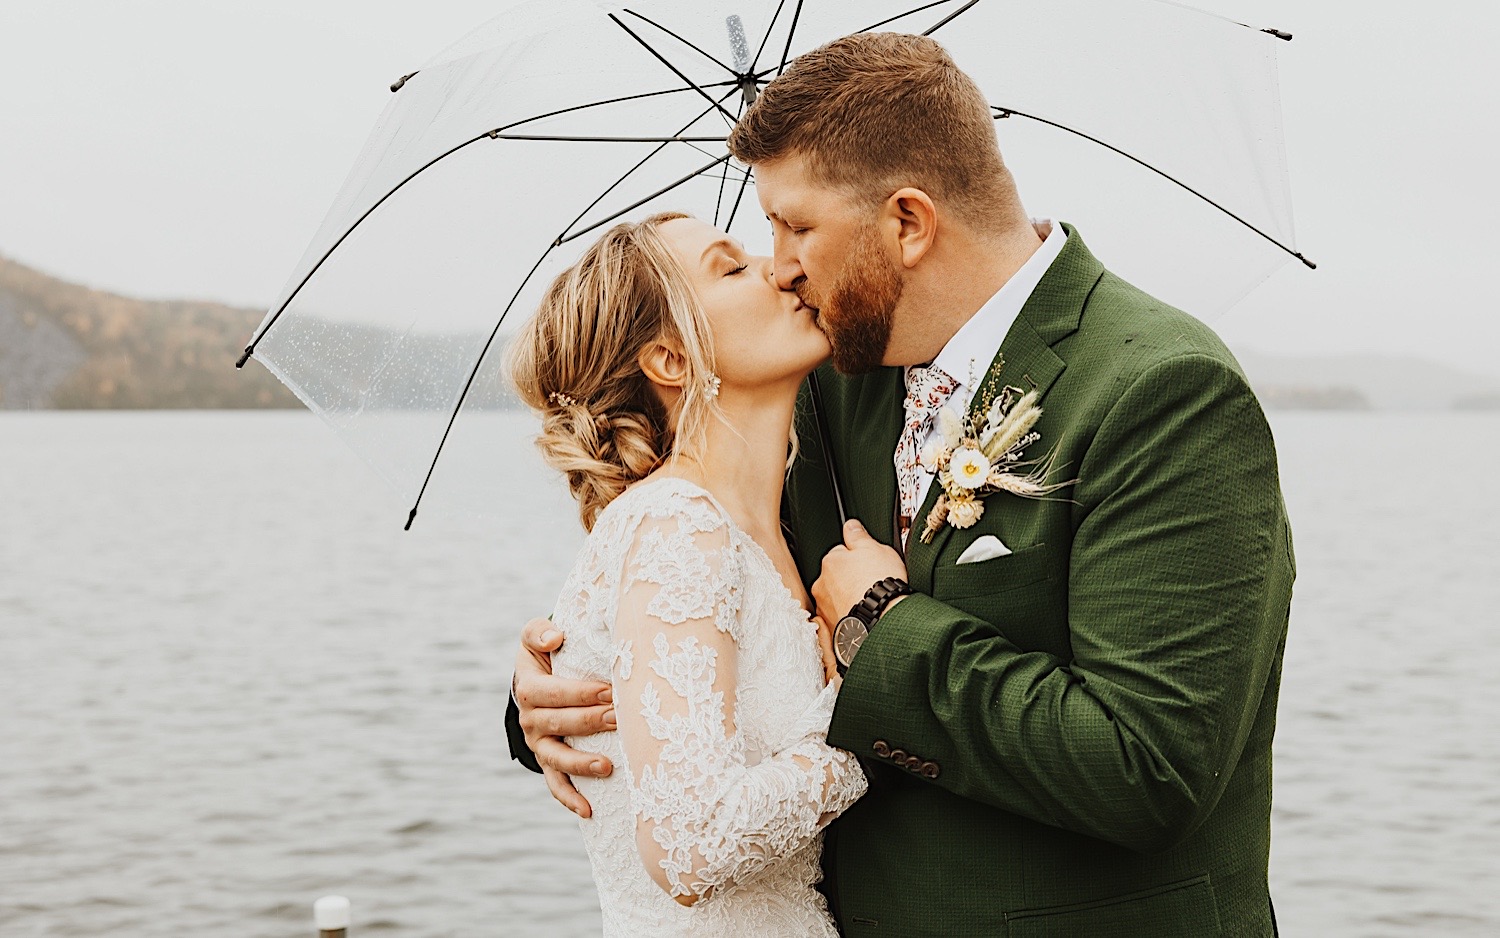 A bride and groom kiss one another while under an umbrella as they stand on a dock of Lake Bomoseen in Vermont